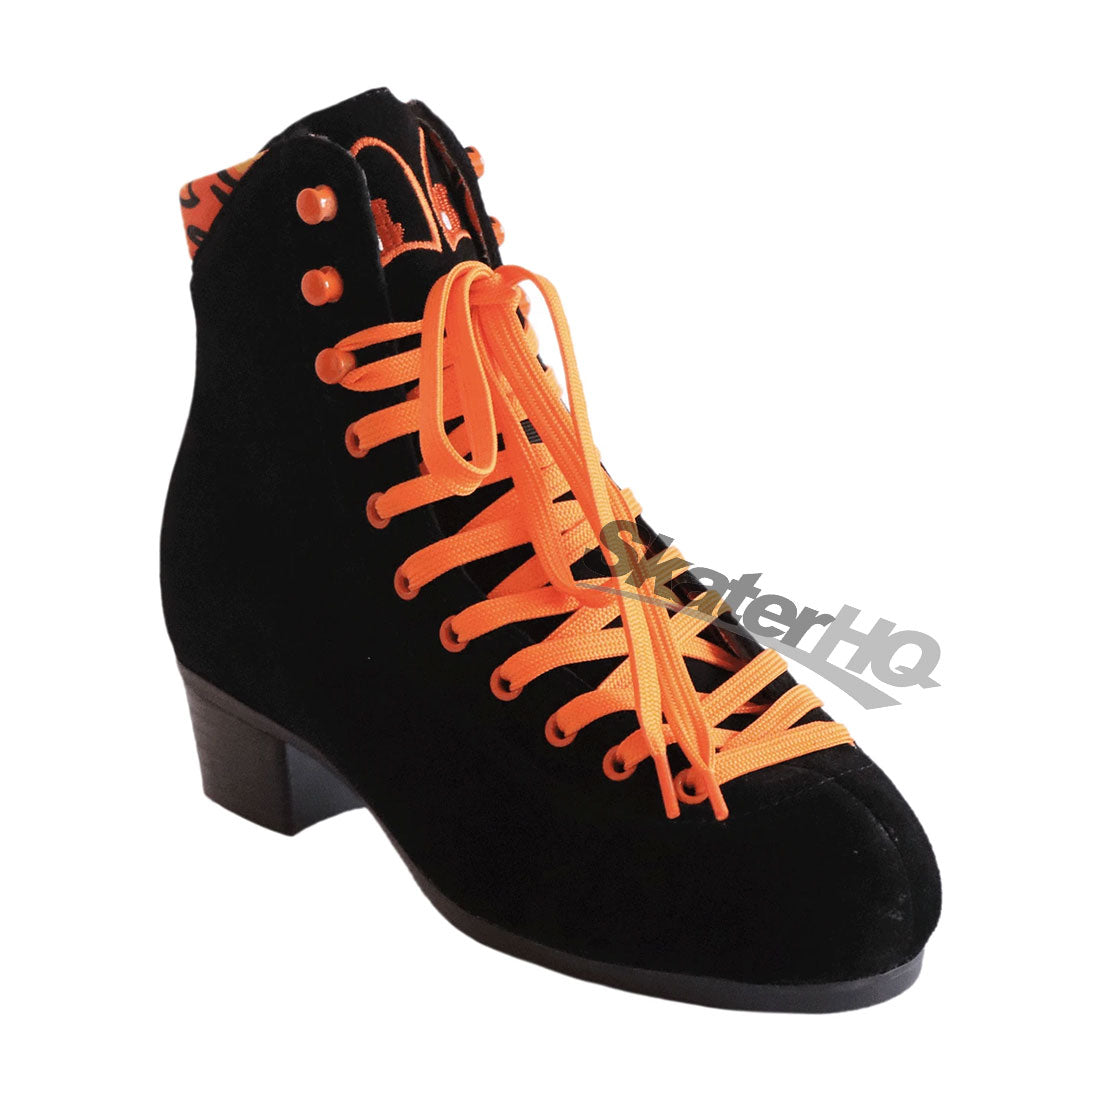 Chuffed Boot - Fuegote Black 4US Roller Skate Boots